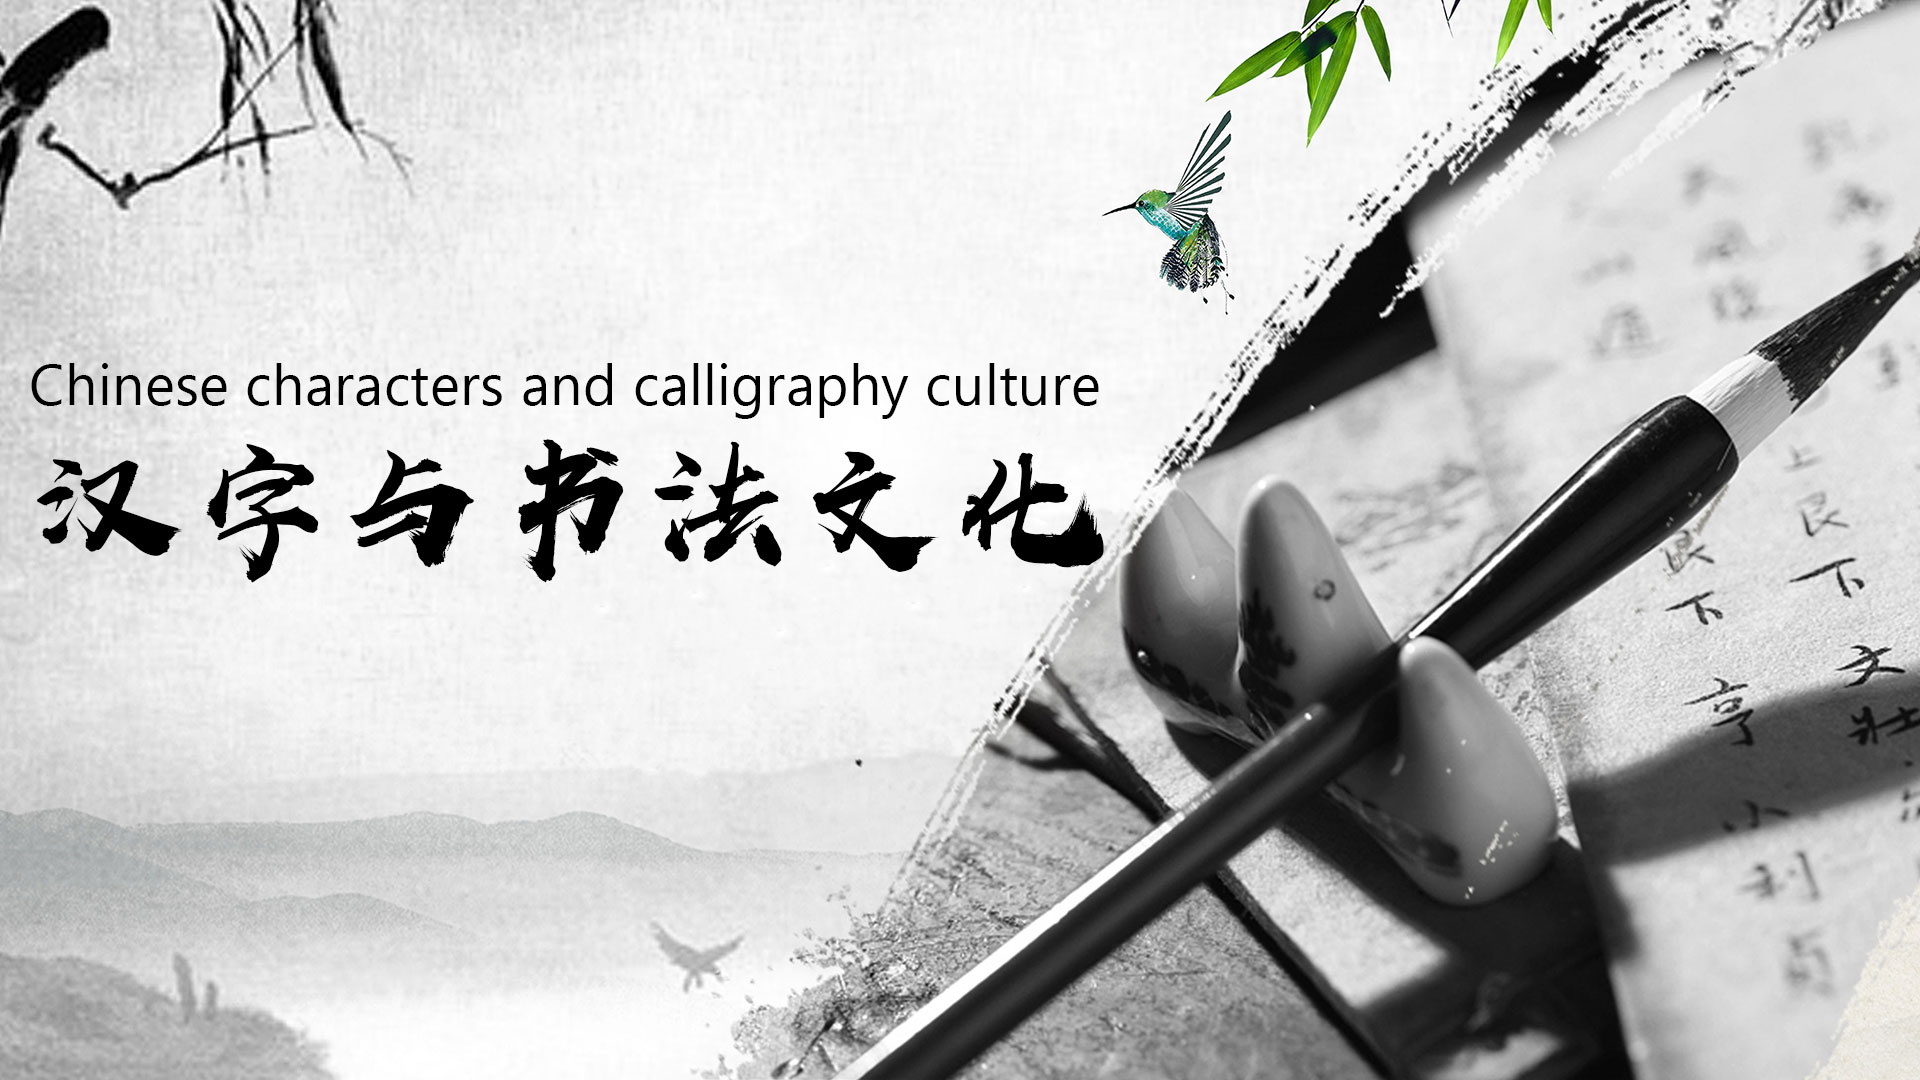 Chinese characters and calligraphy culture